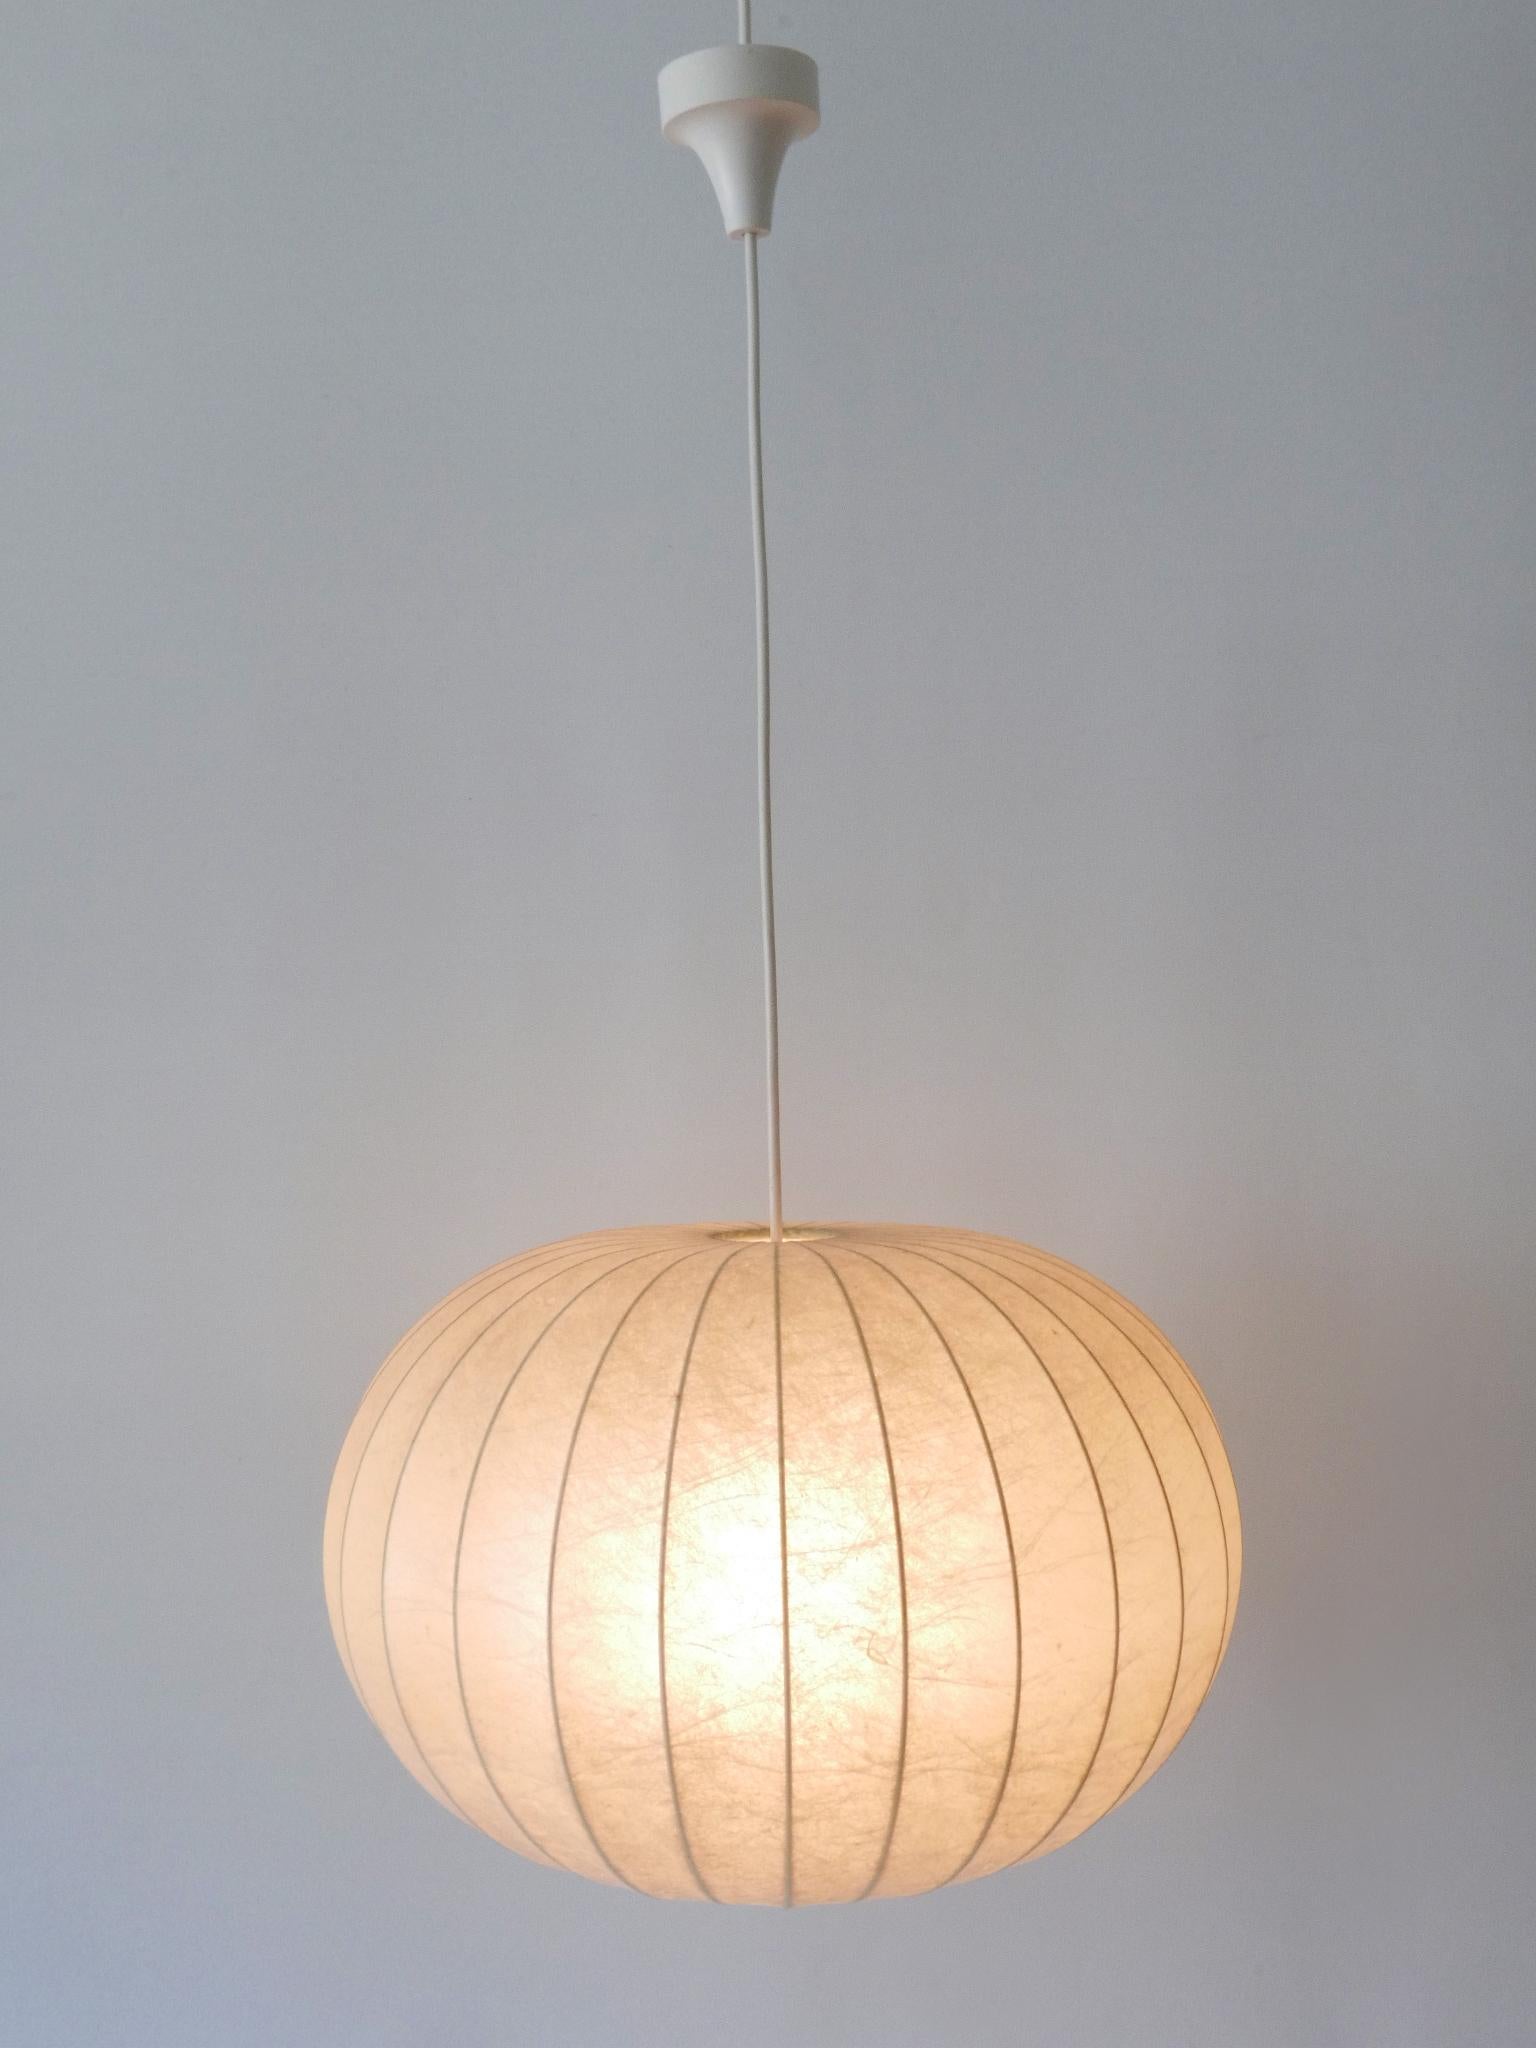 Lovely Midcentury Modern Cocoon Pendant Lamp or Hanging Light Germany 1960s For Sale 1